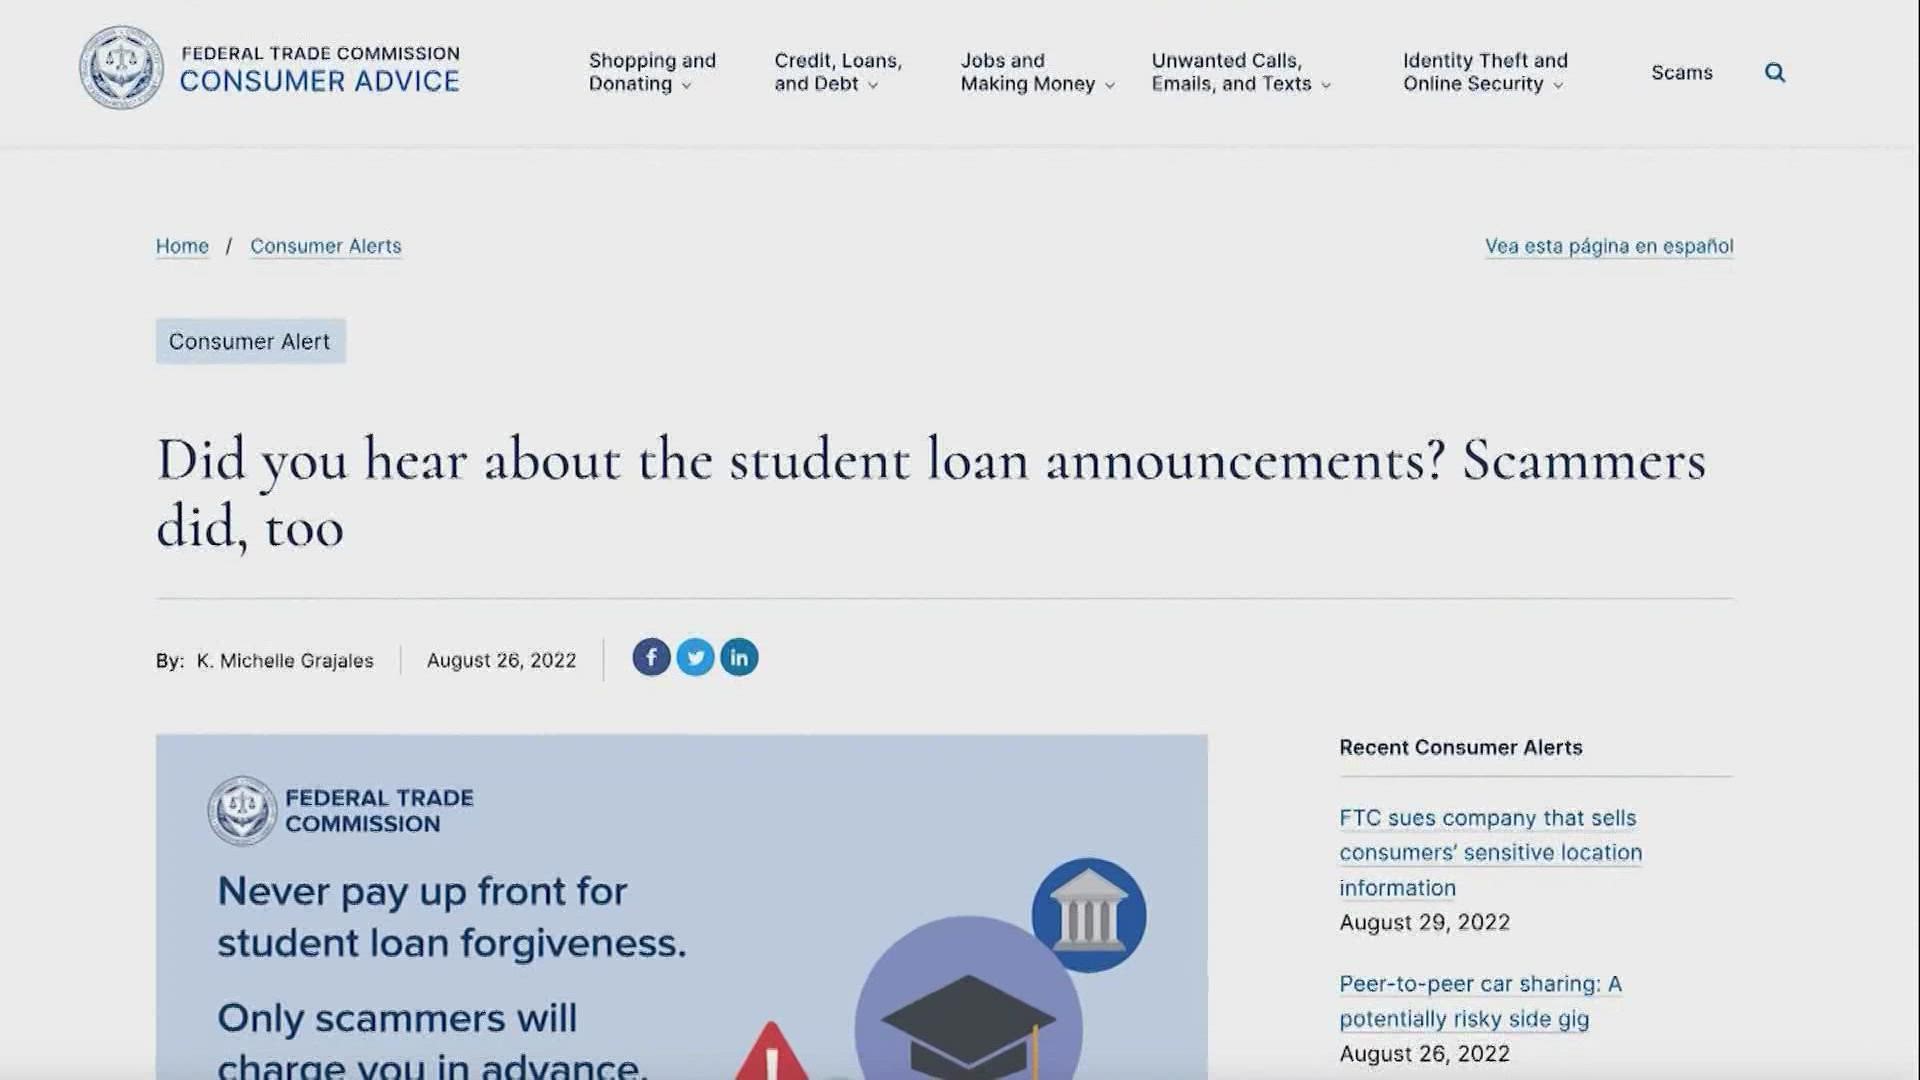 As the White House rolls out details on student loan forgiveness, scammers are ready to steal money or identities, according to the BBB of Washington.